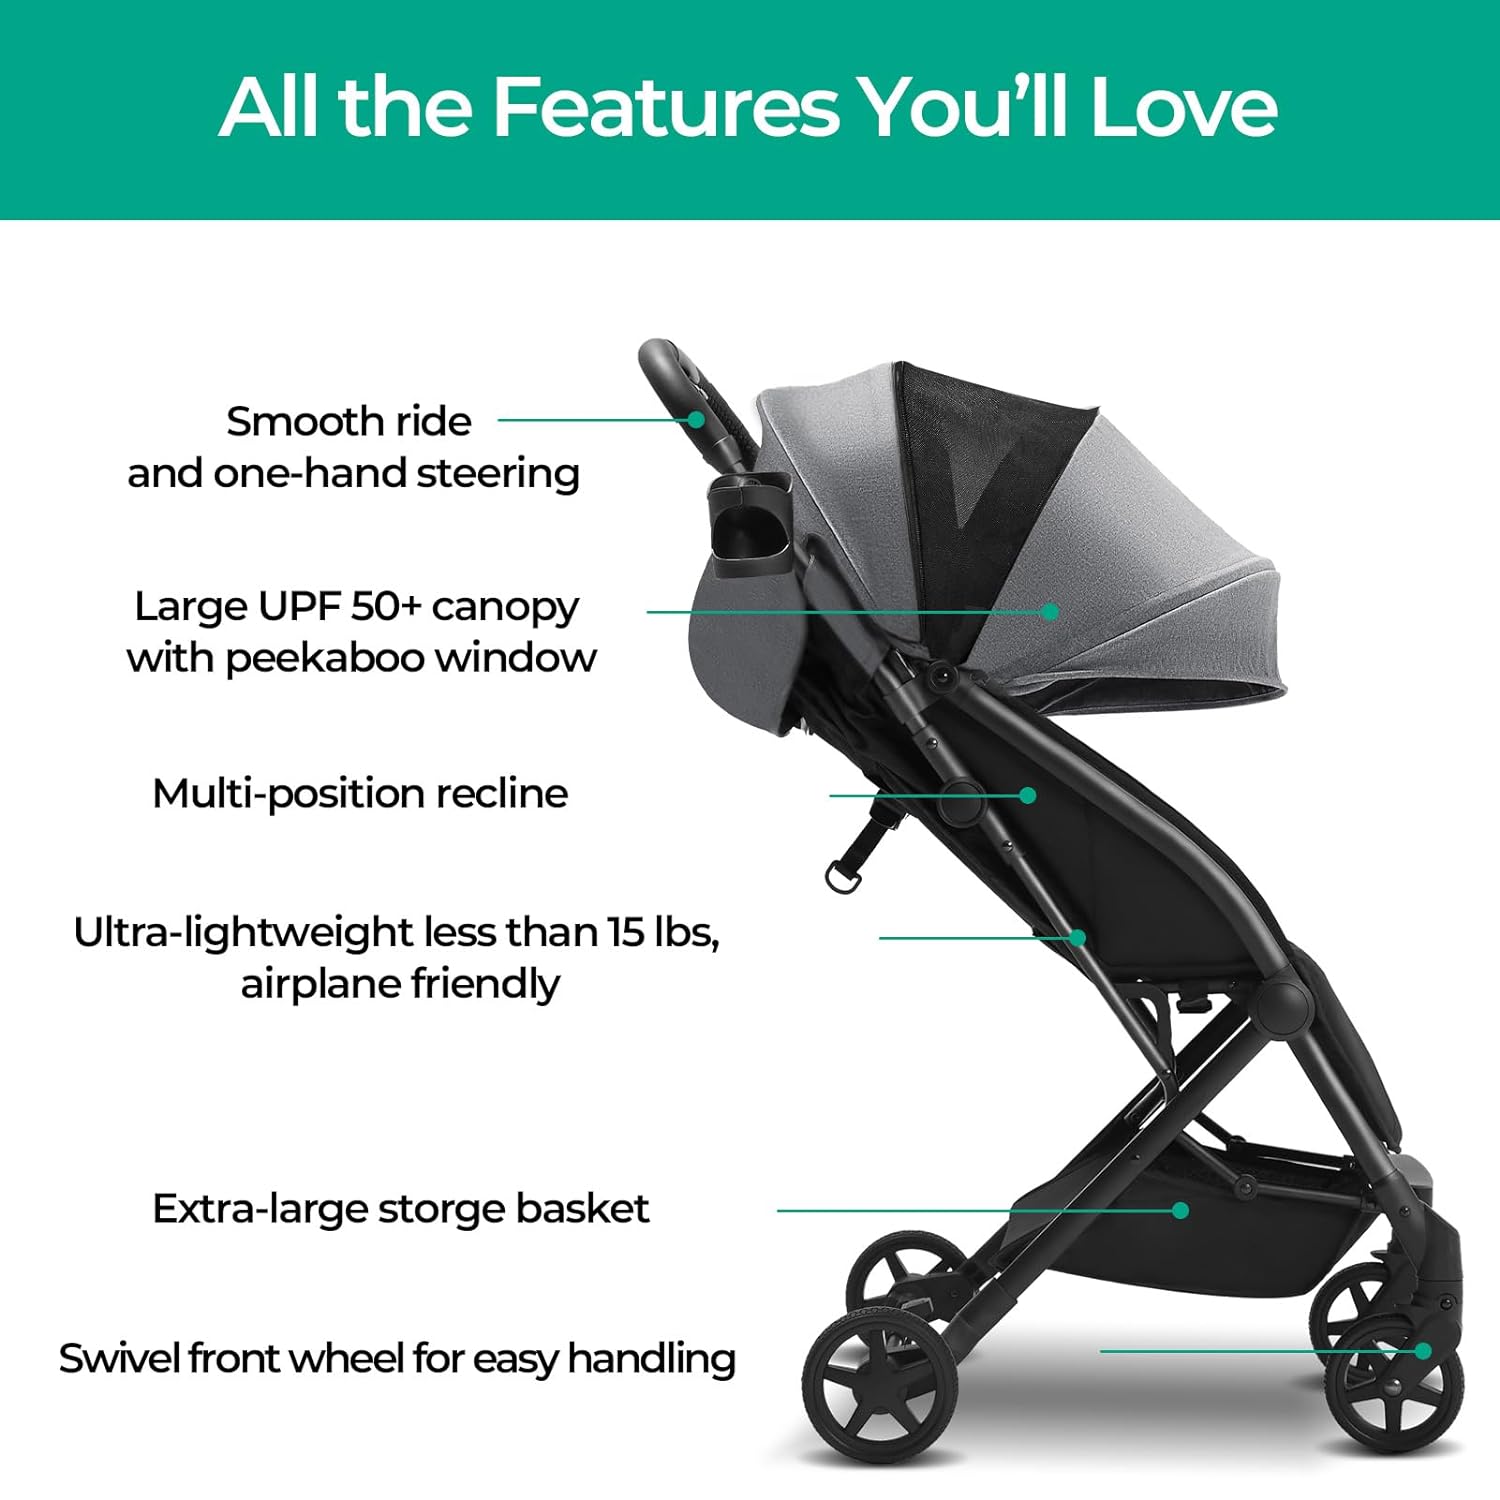 Mompush Lithe Lightweight Stroller, Compact One-Hand Fold Travel Stroller for Airplane Friendly, Reclining Seat and Large Canopy, with Rain Cover & Travel Carry Bag & Cup Holder